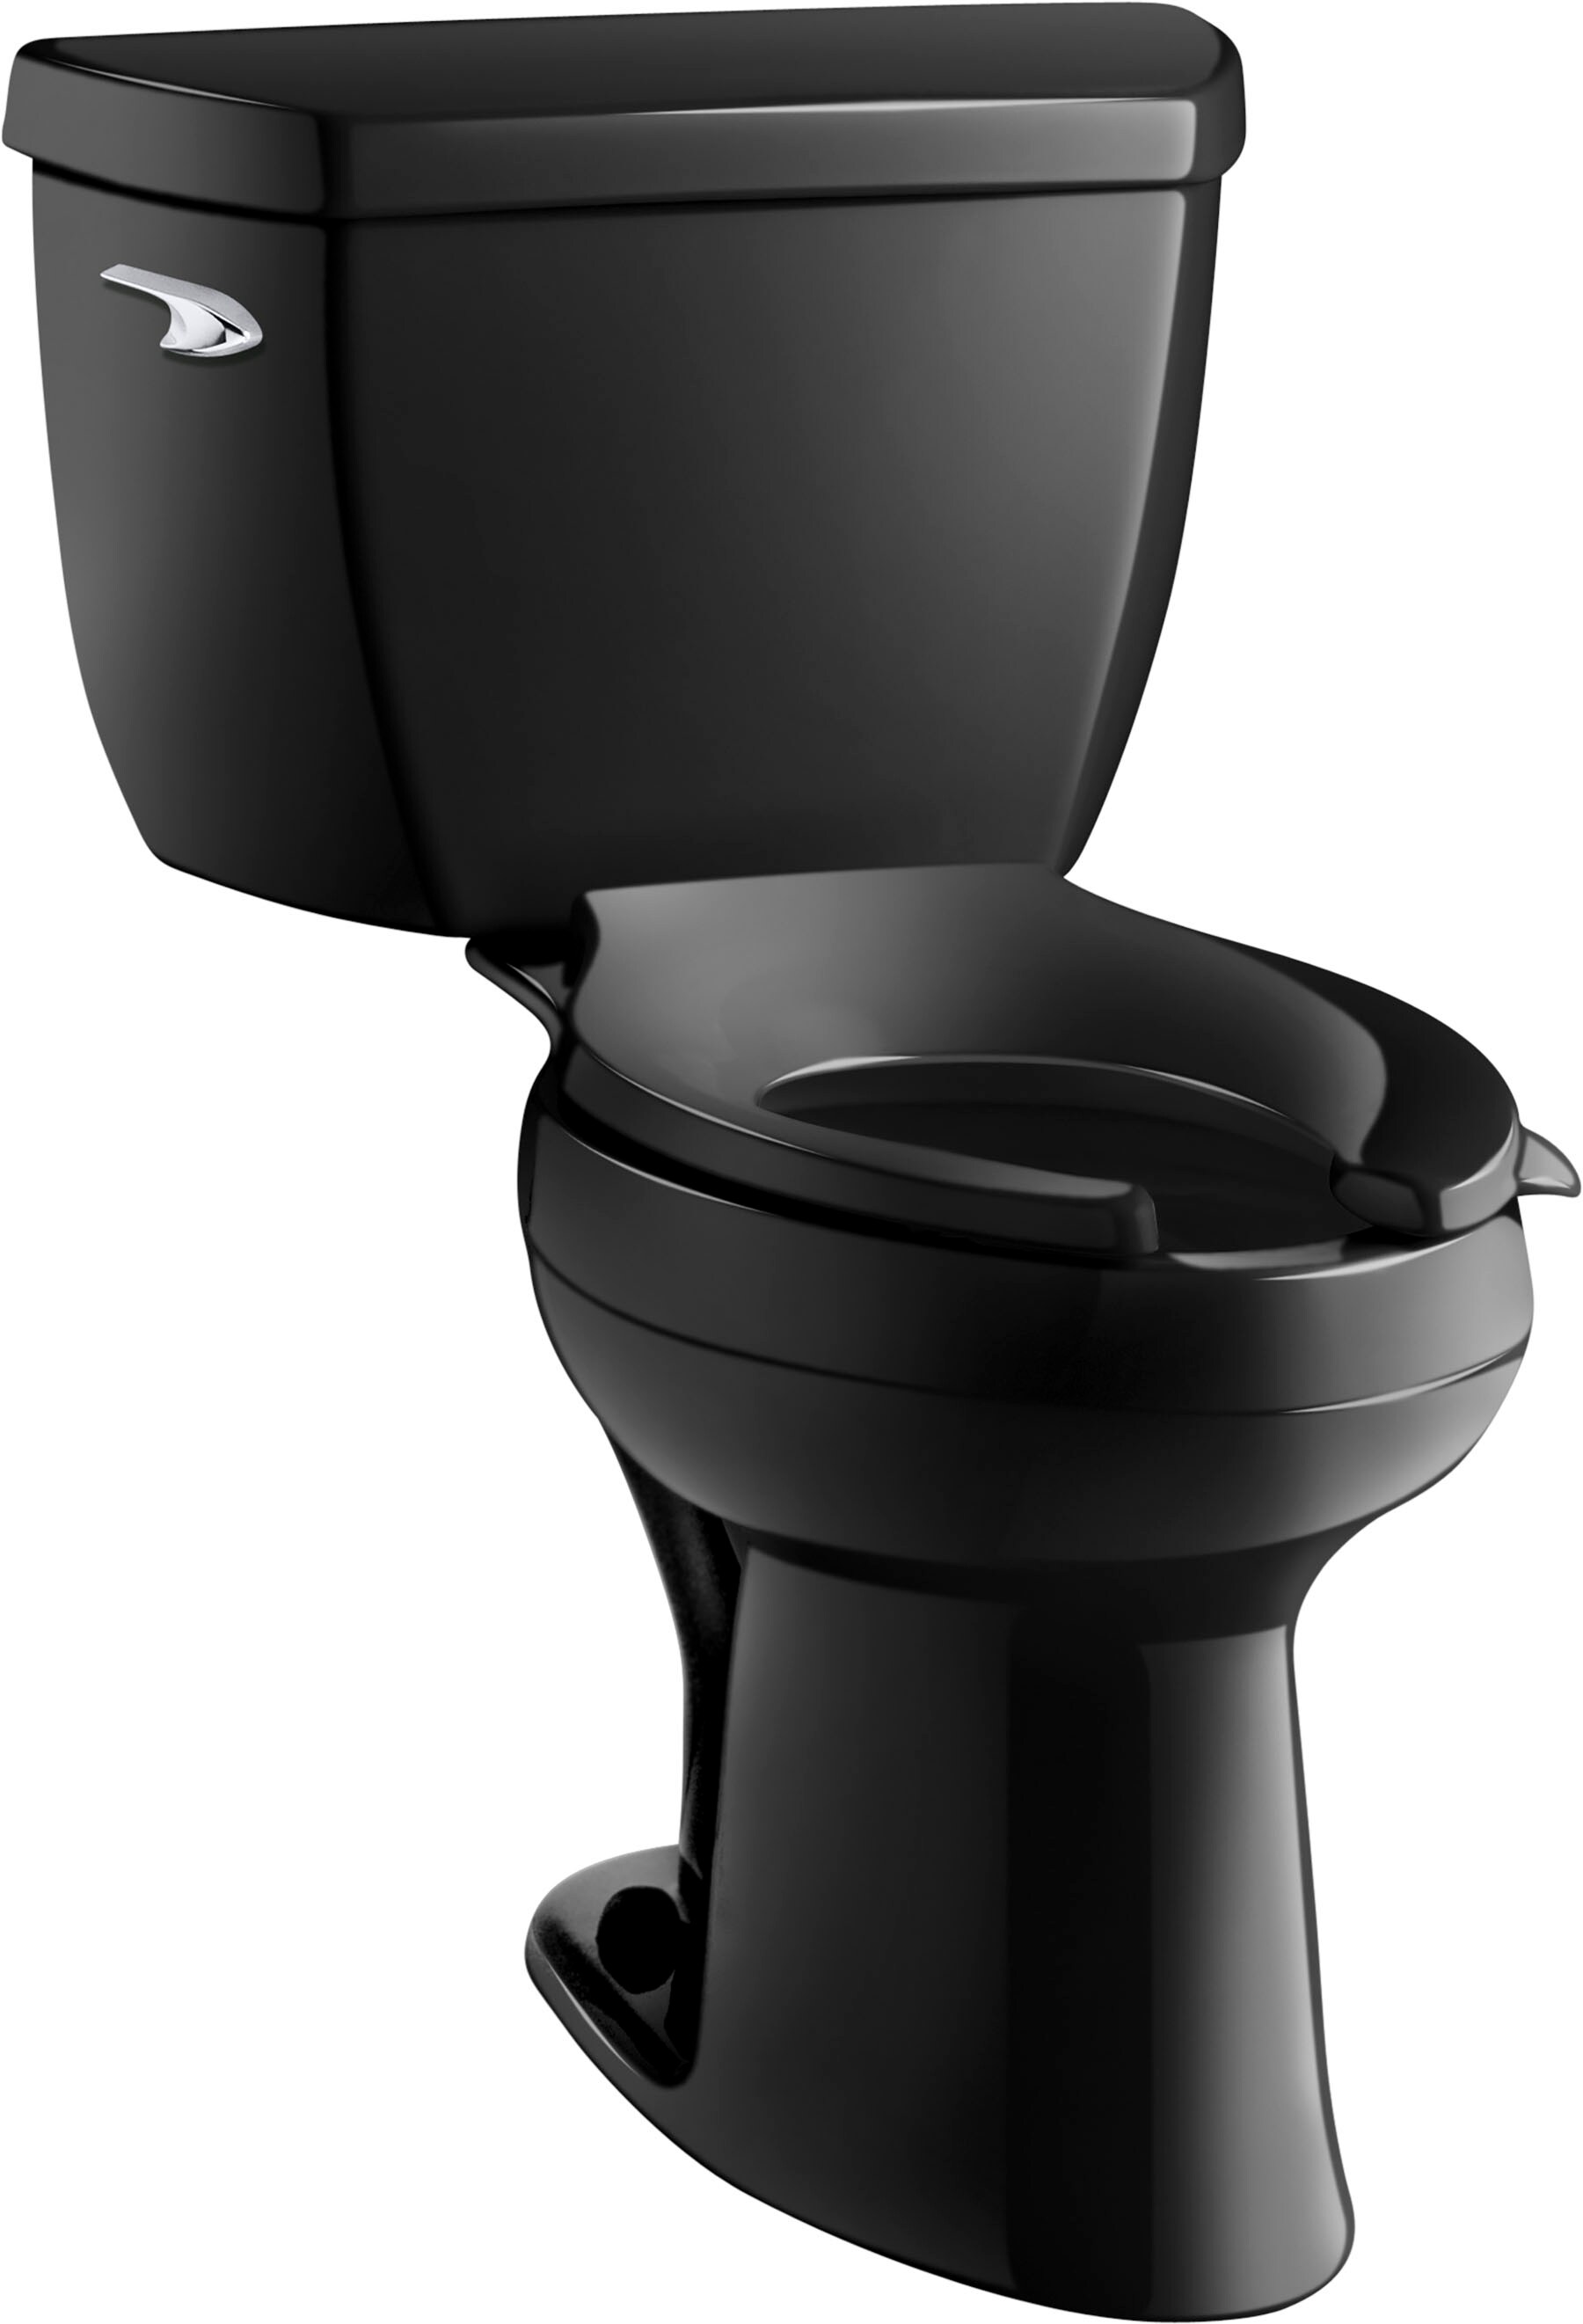 Black Toilets (300+ products) compare prices today »